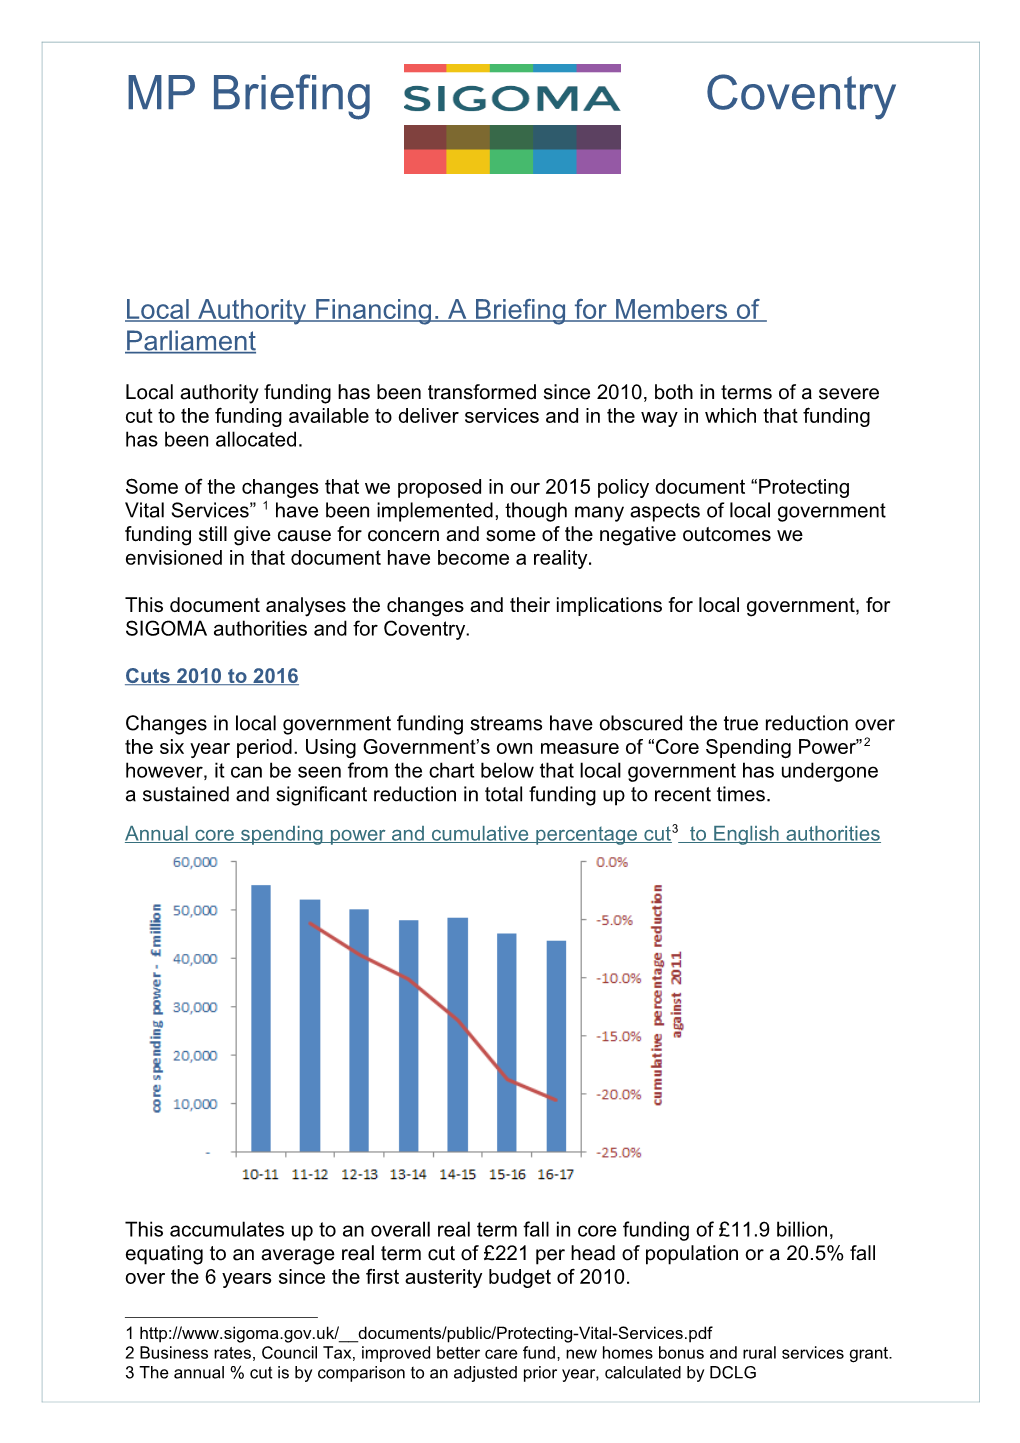 Local Authority Financing. a Briefing for Members of Parliament